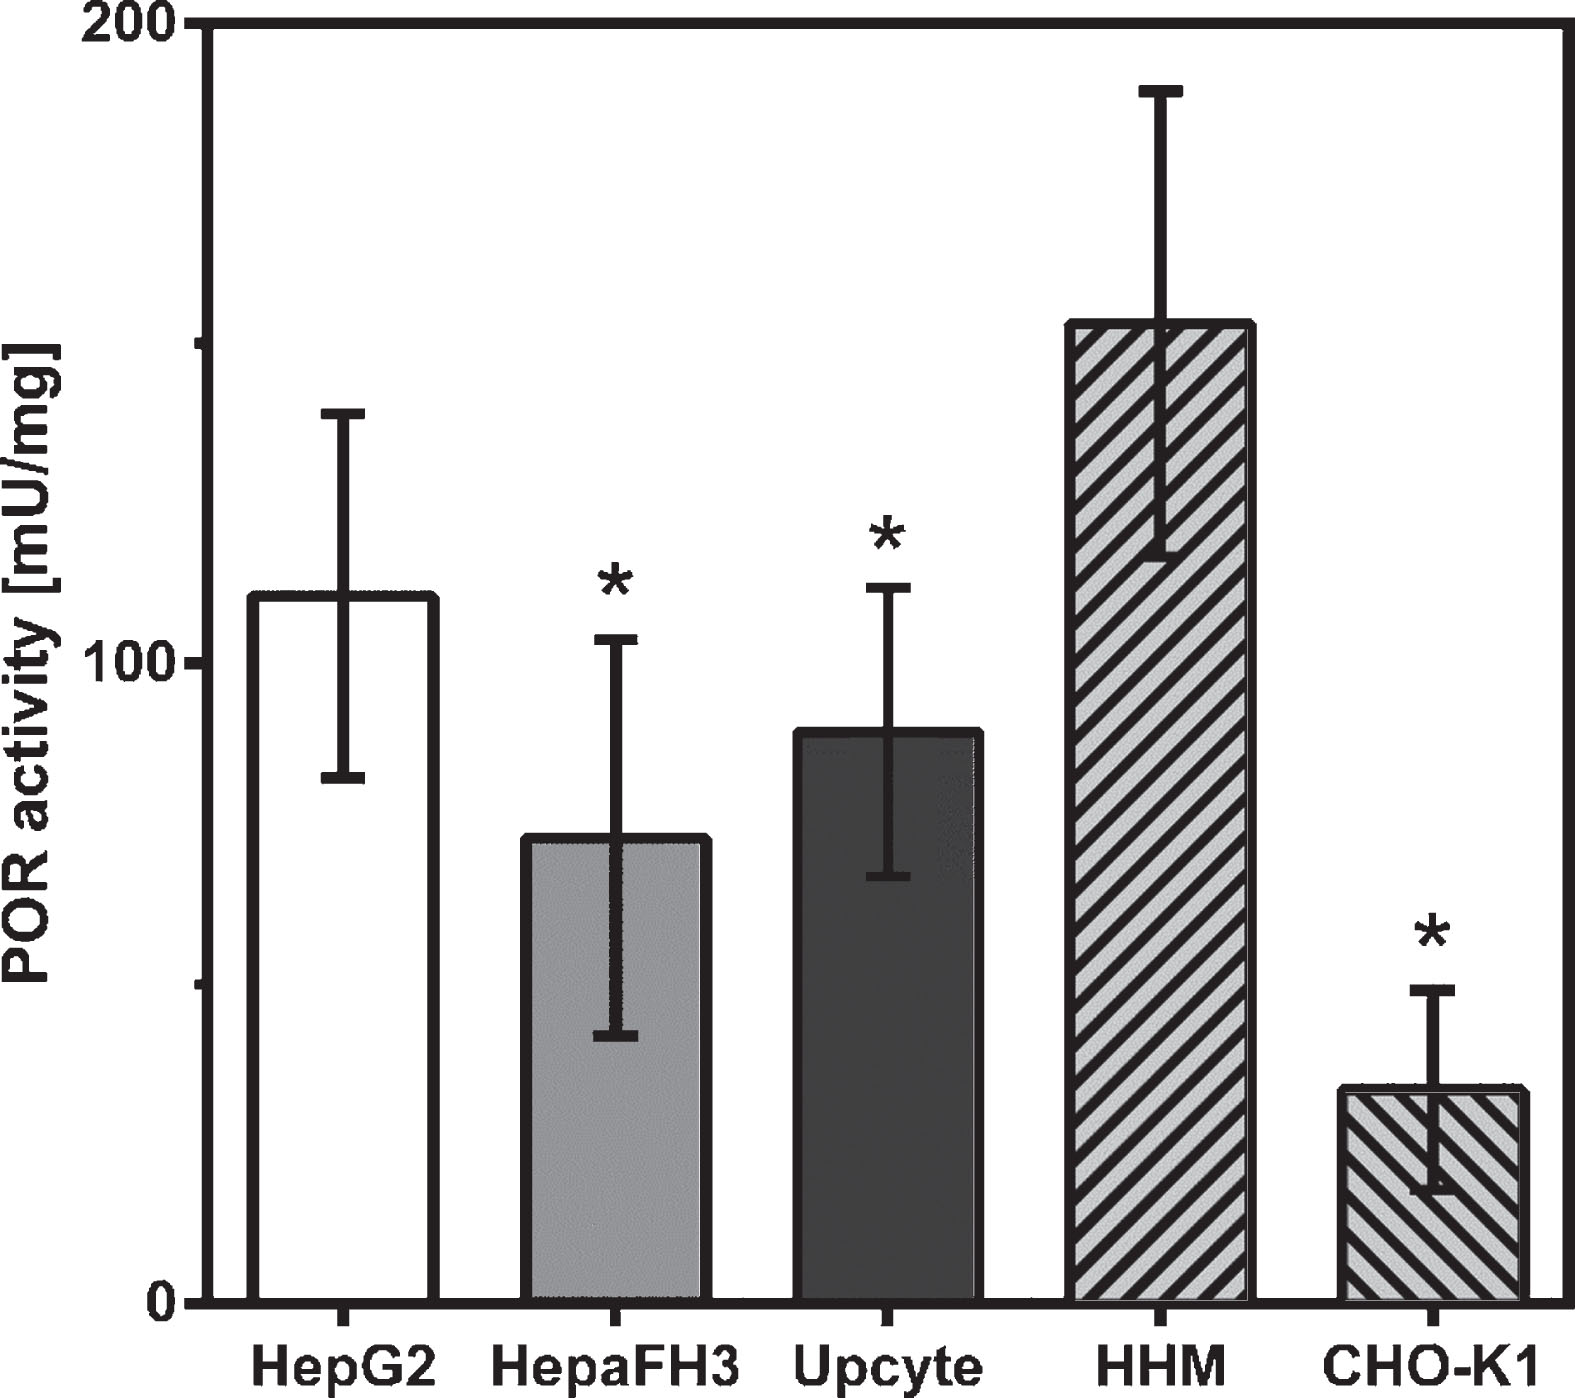 POR activity levels in hepatocyte cultures and non-hepatocyte CHO cells. Exponentially growing cells were processed for microsome isolations and quantitative determinations of POR enzyme activity. Human hepatocyte microsomes (HHM) isolated from liver biopsies served as positive control, CHO-K1 cells as negative control. Data shown as arithmetic mean±standard deviation; *p < 0.05; *significant changes compared to HHM; n = 6.